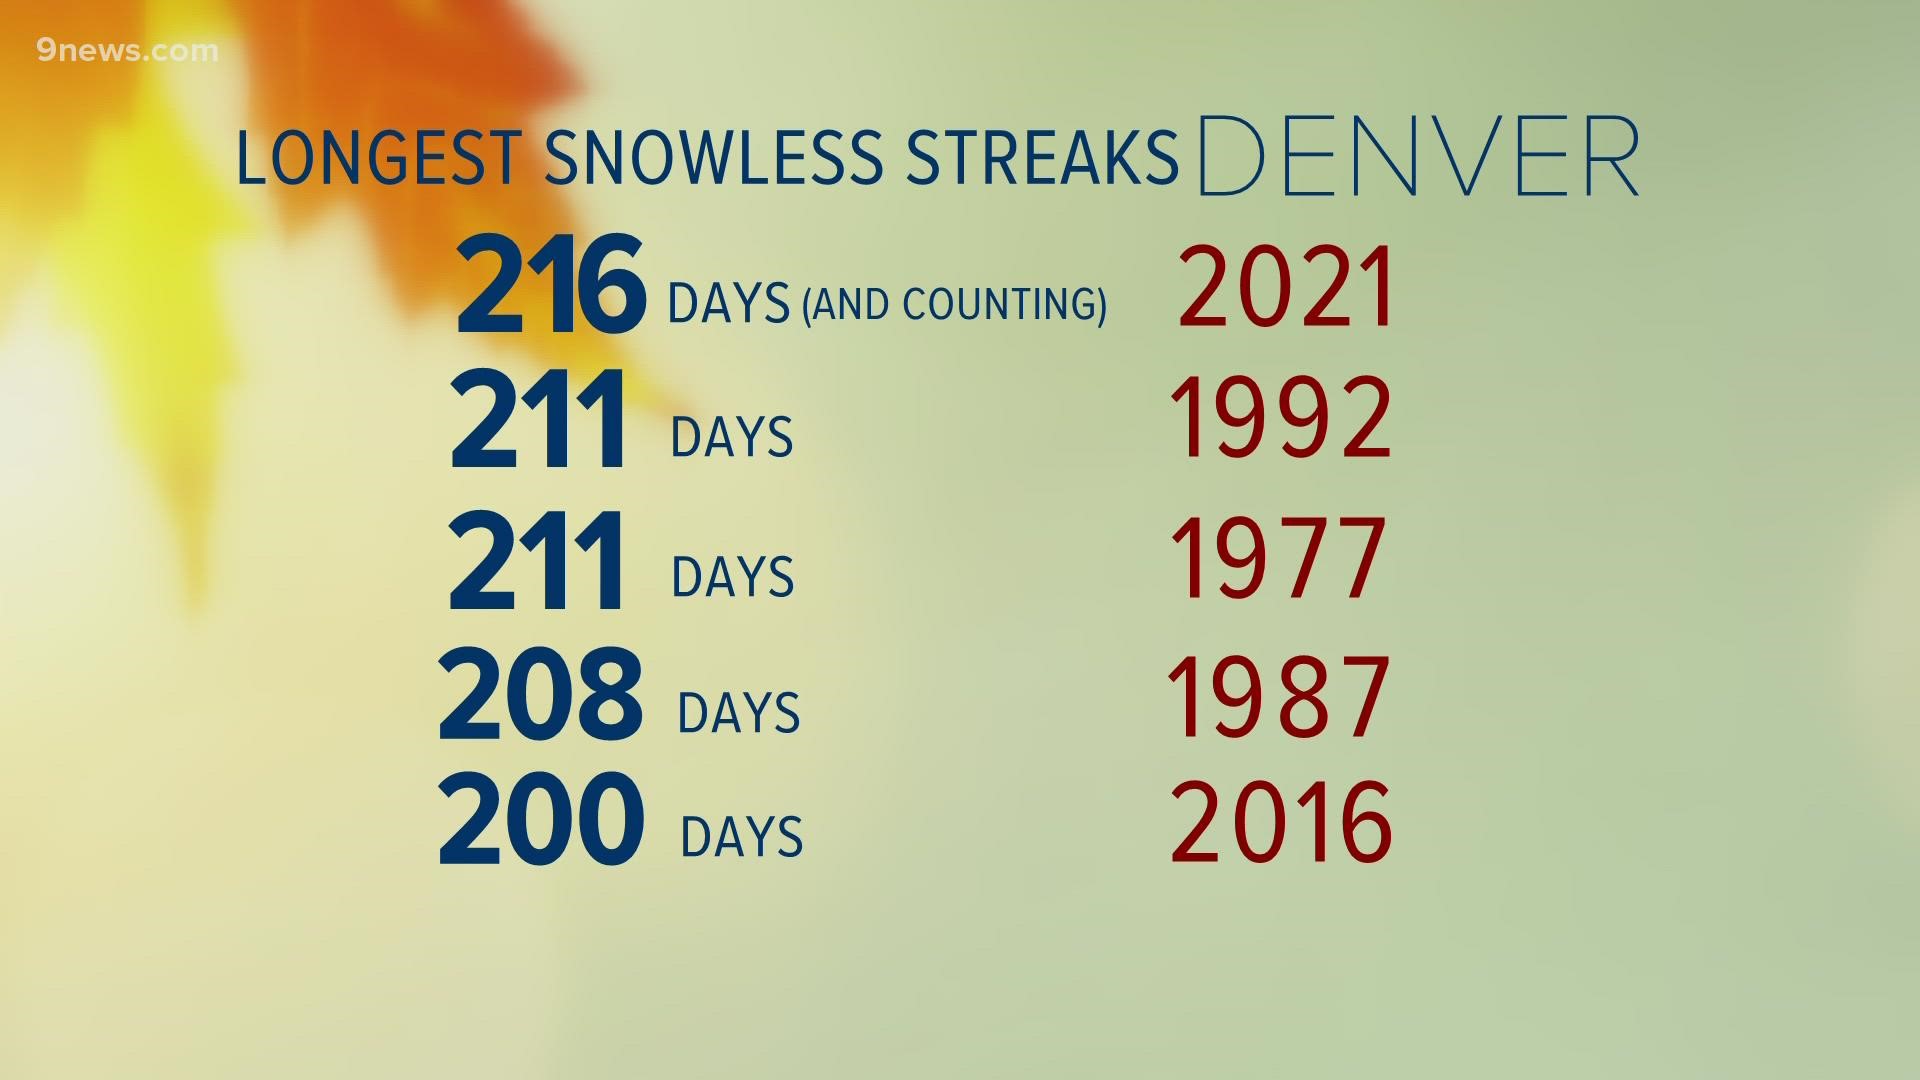 With no snow through Sunday, 2021 will feature Denver's latest first measurable snowfall on record. And if the snow doesn't start soon, more records will fall.